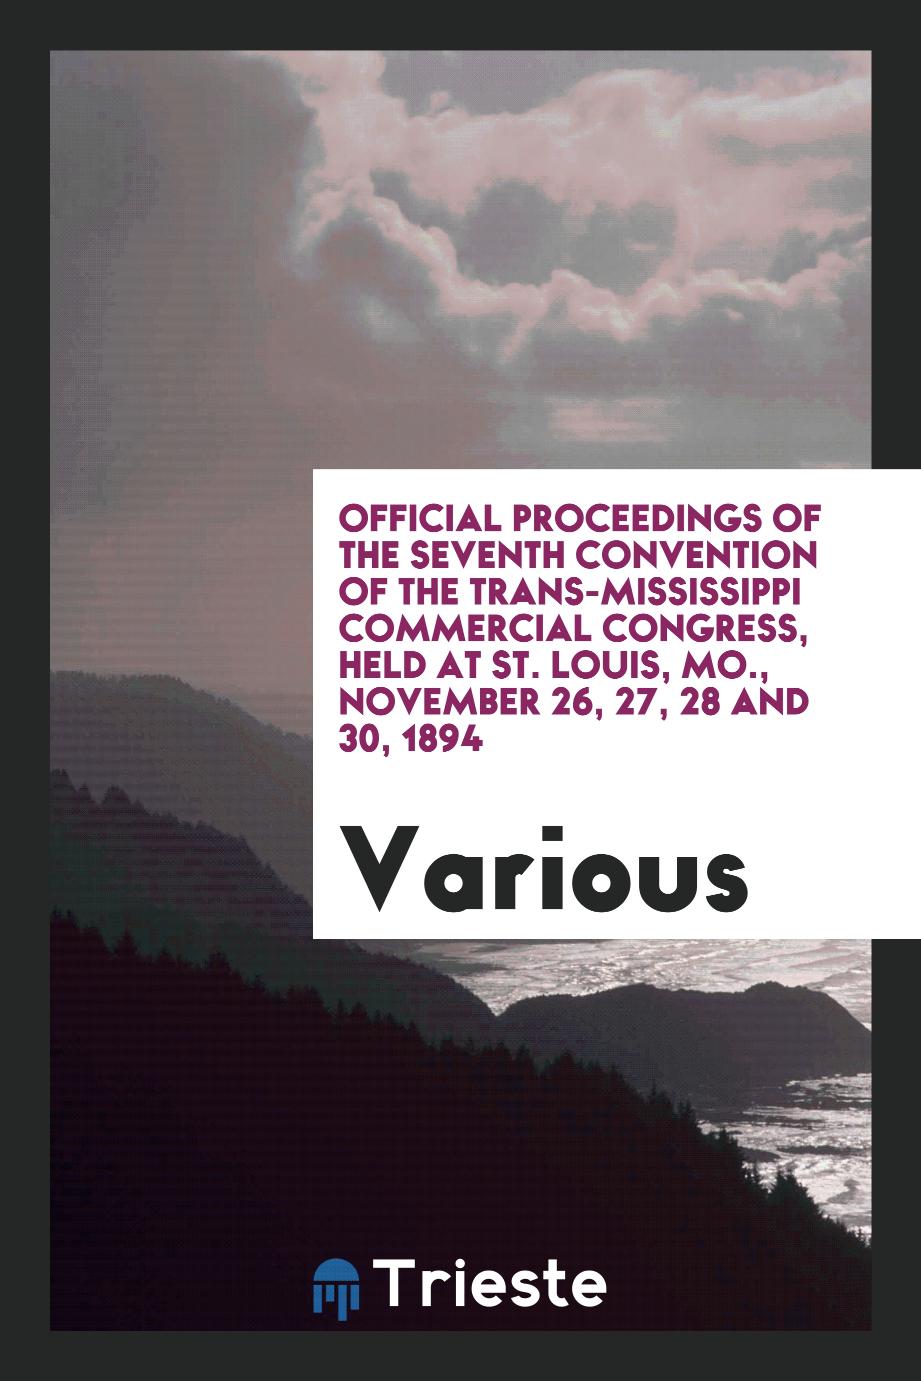 Official proceedings of the seventh convention of the Trans-Mississippi Commercial Congress, held at St. Louis, Mo., November 26, 27, 28 and 30, 1894